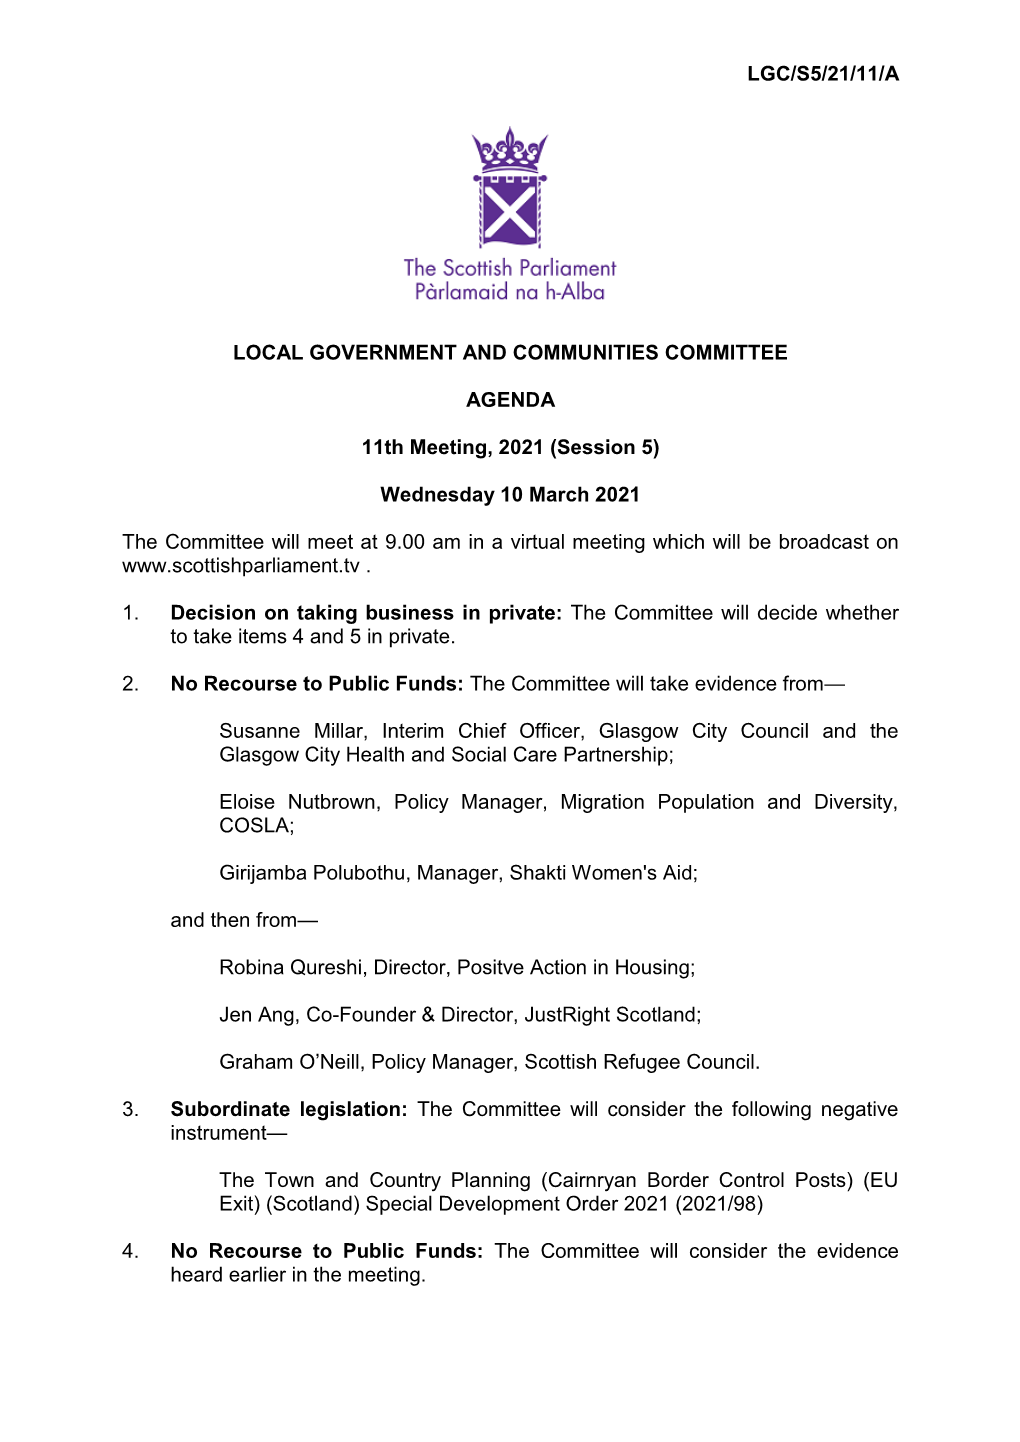 Papers for the Meeting on Wednesday 10 March